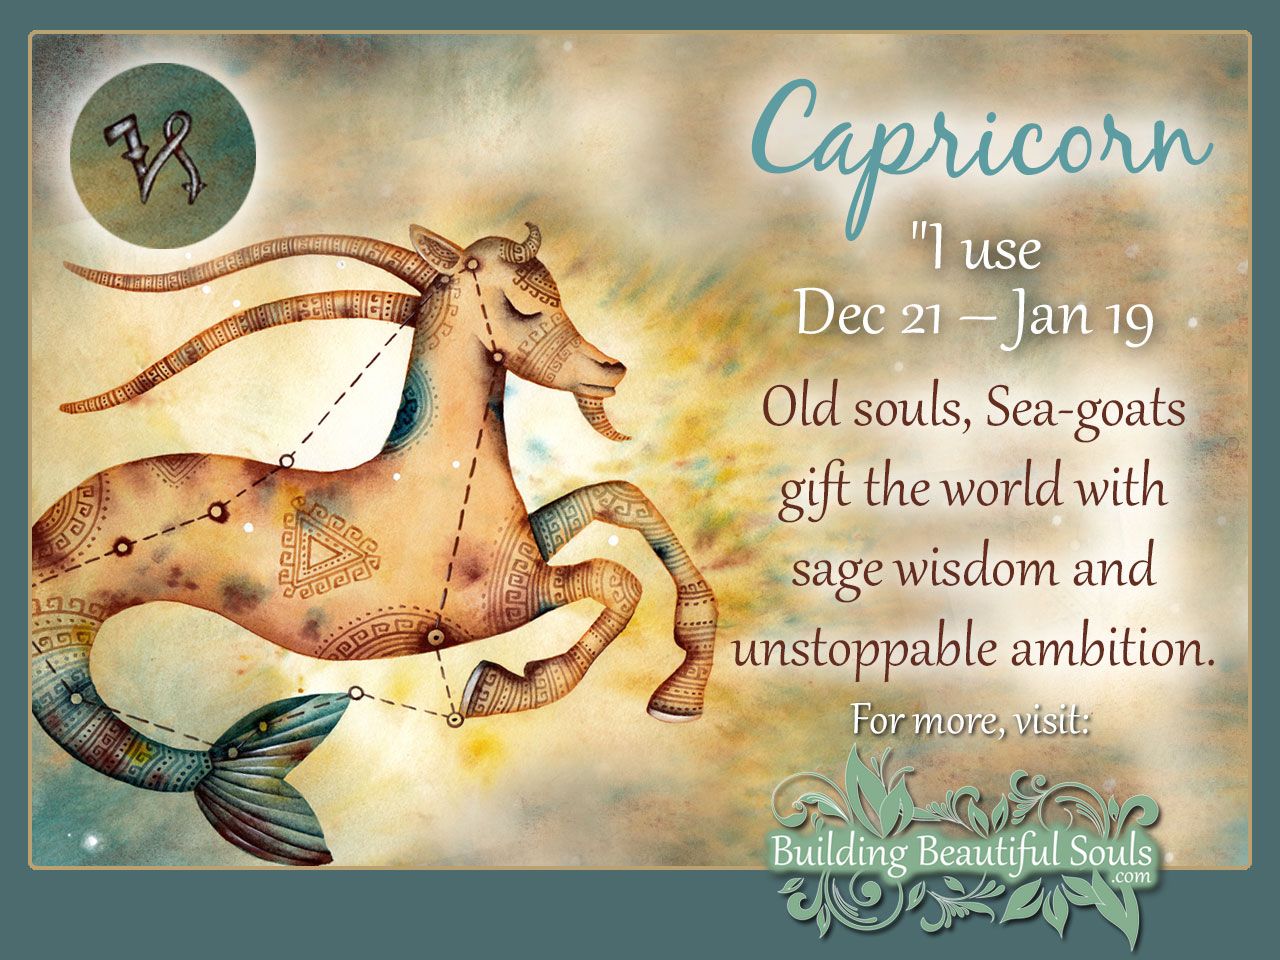 How Is Capricorn Different From Other Zodiac Signs?